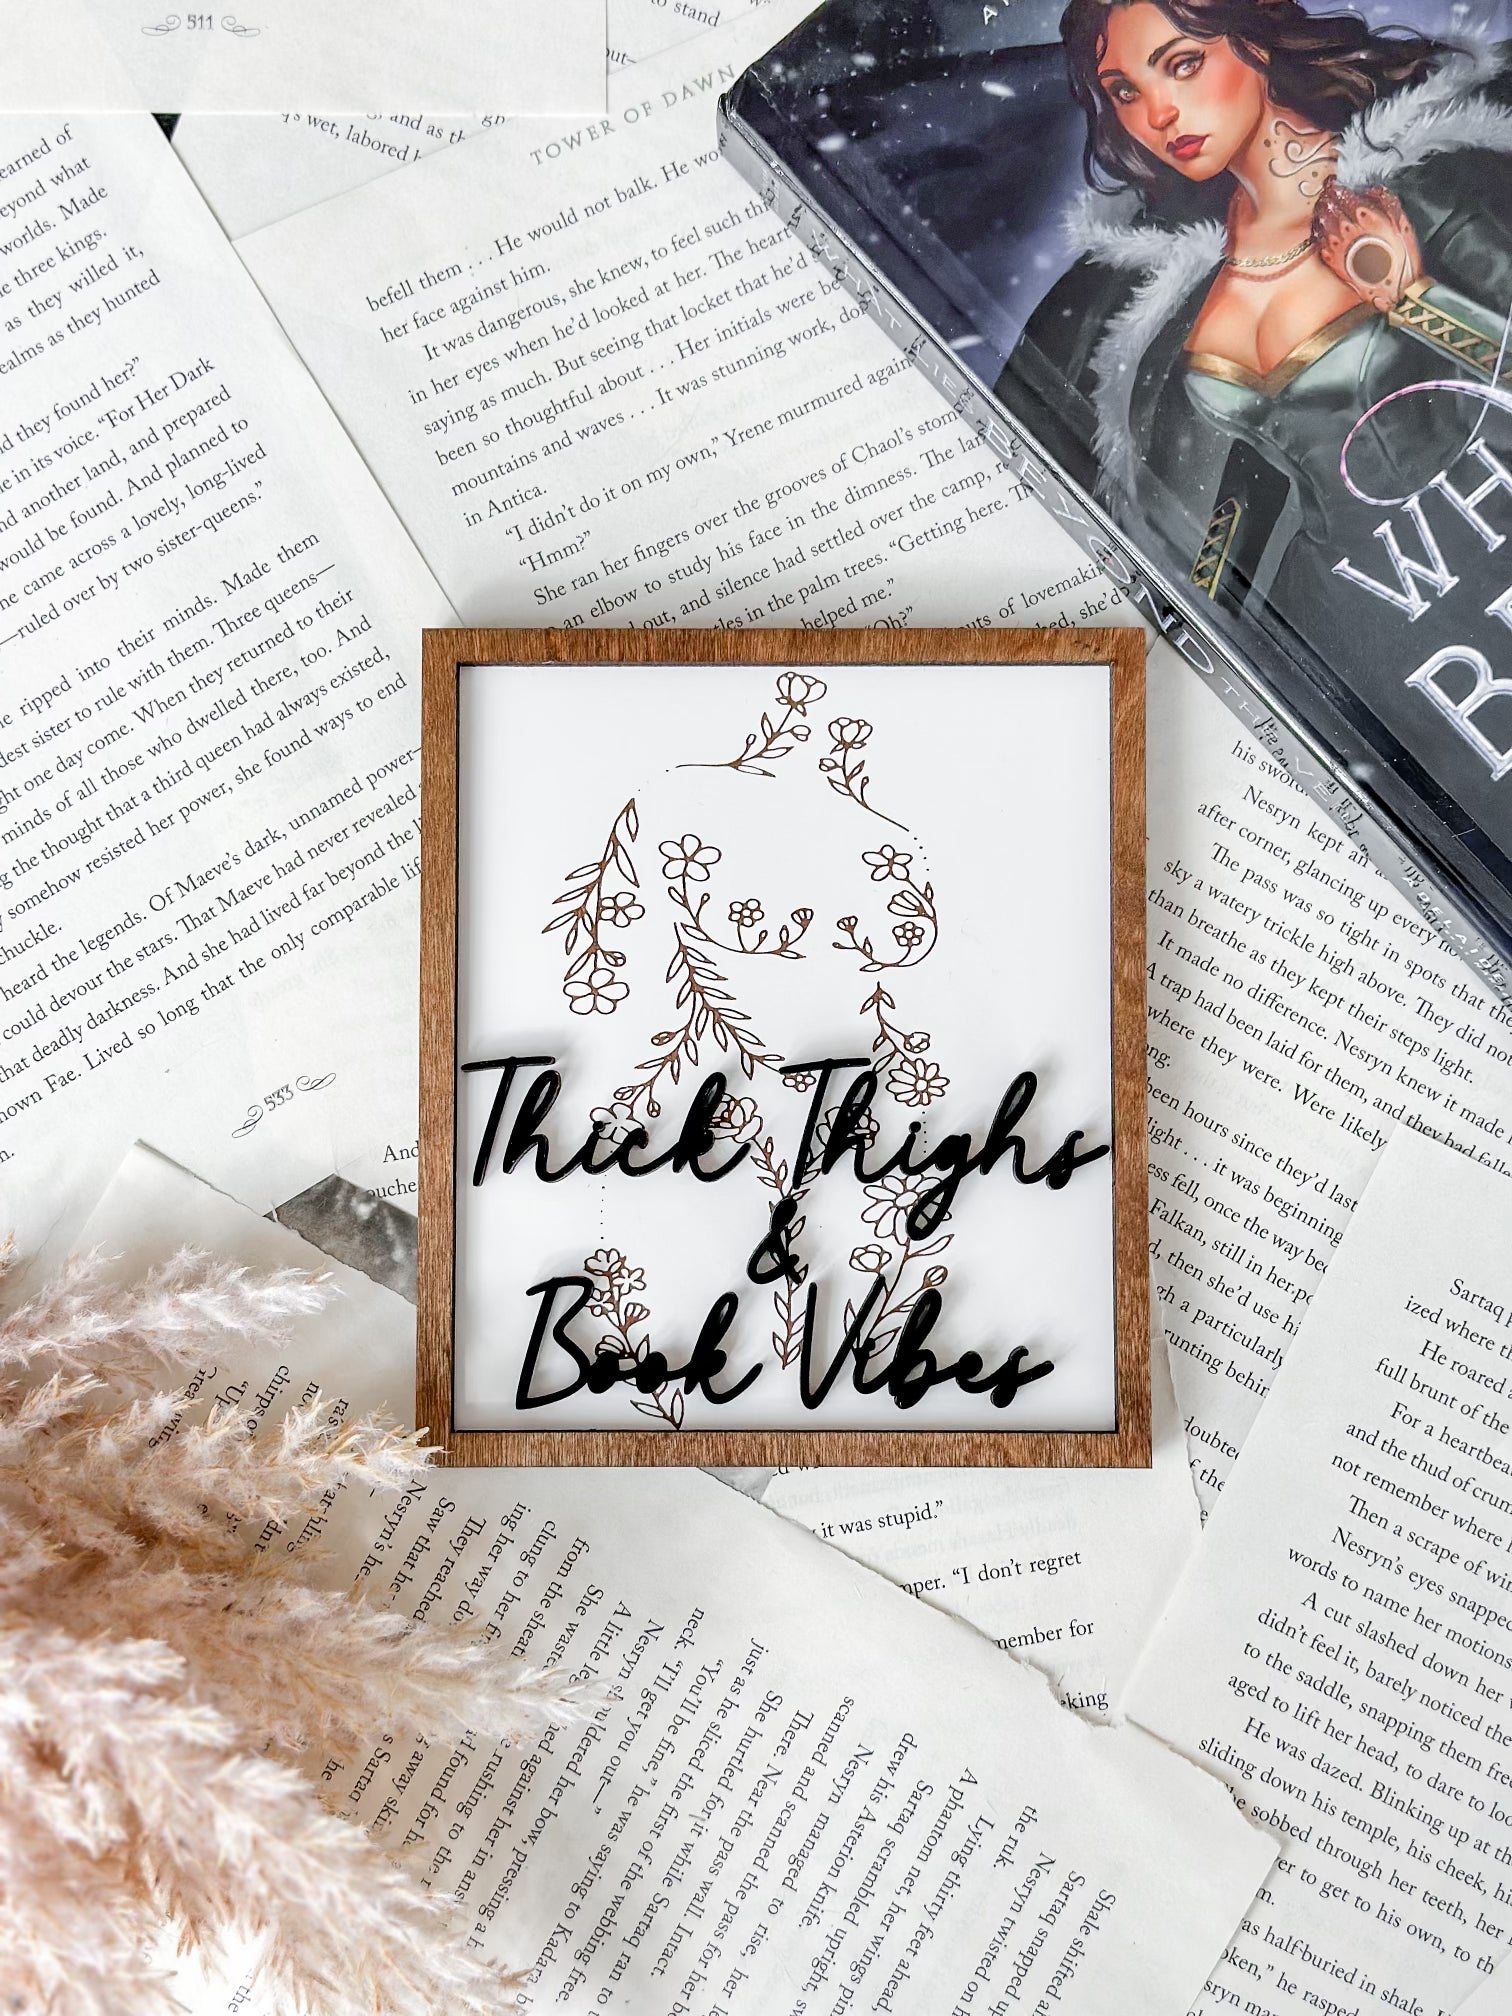 Thick Thighs & Book Vibes Sign - firedrakeartistry